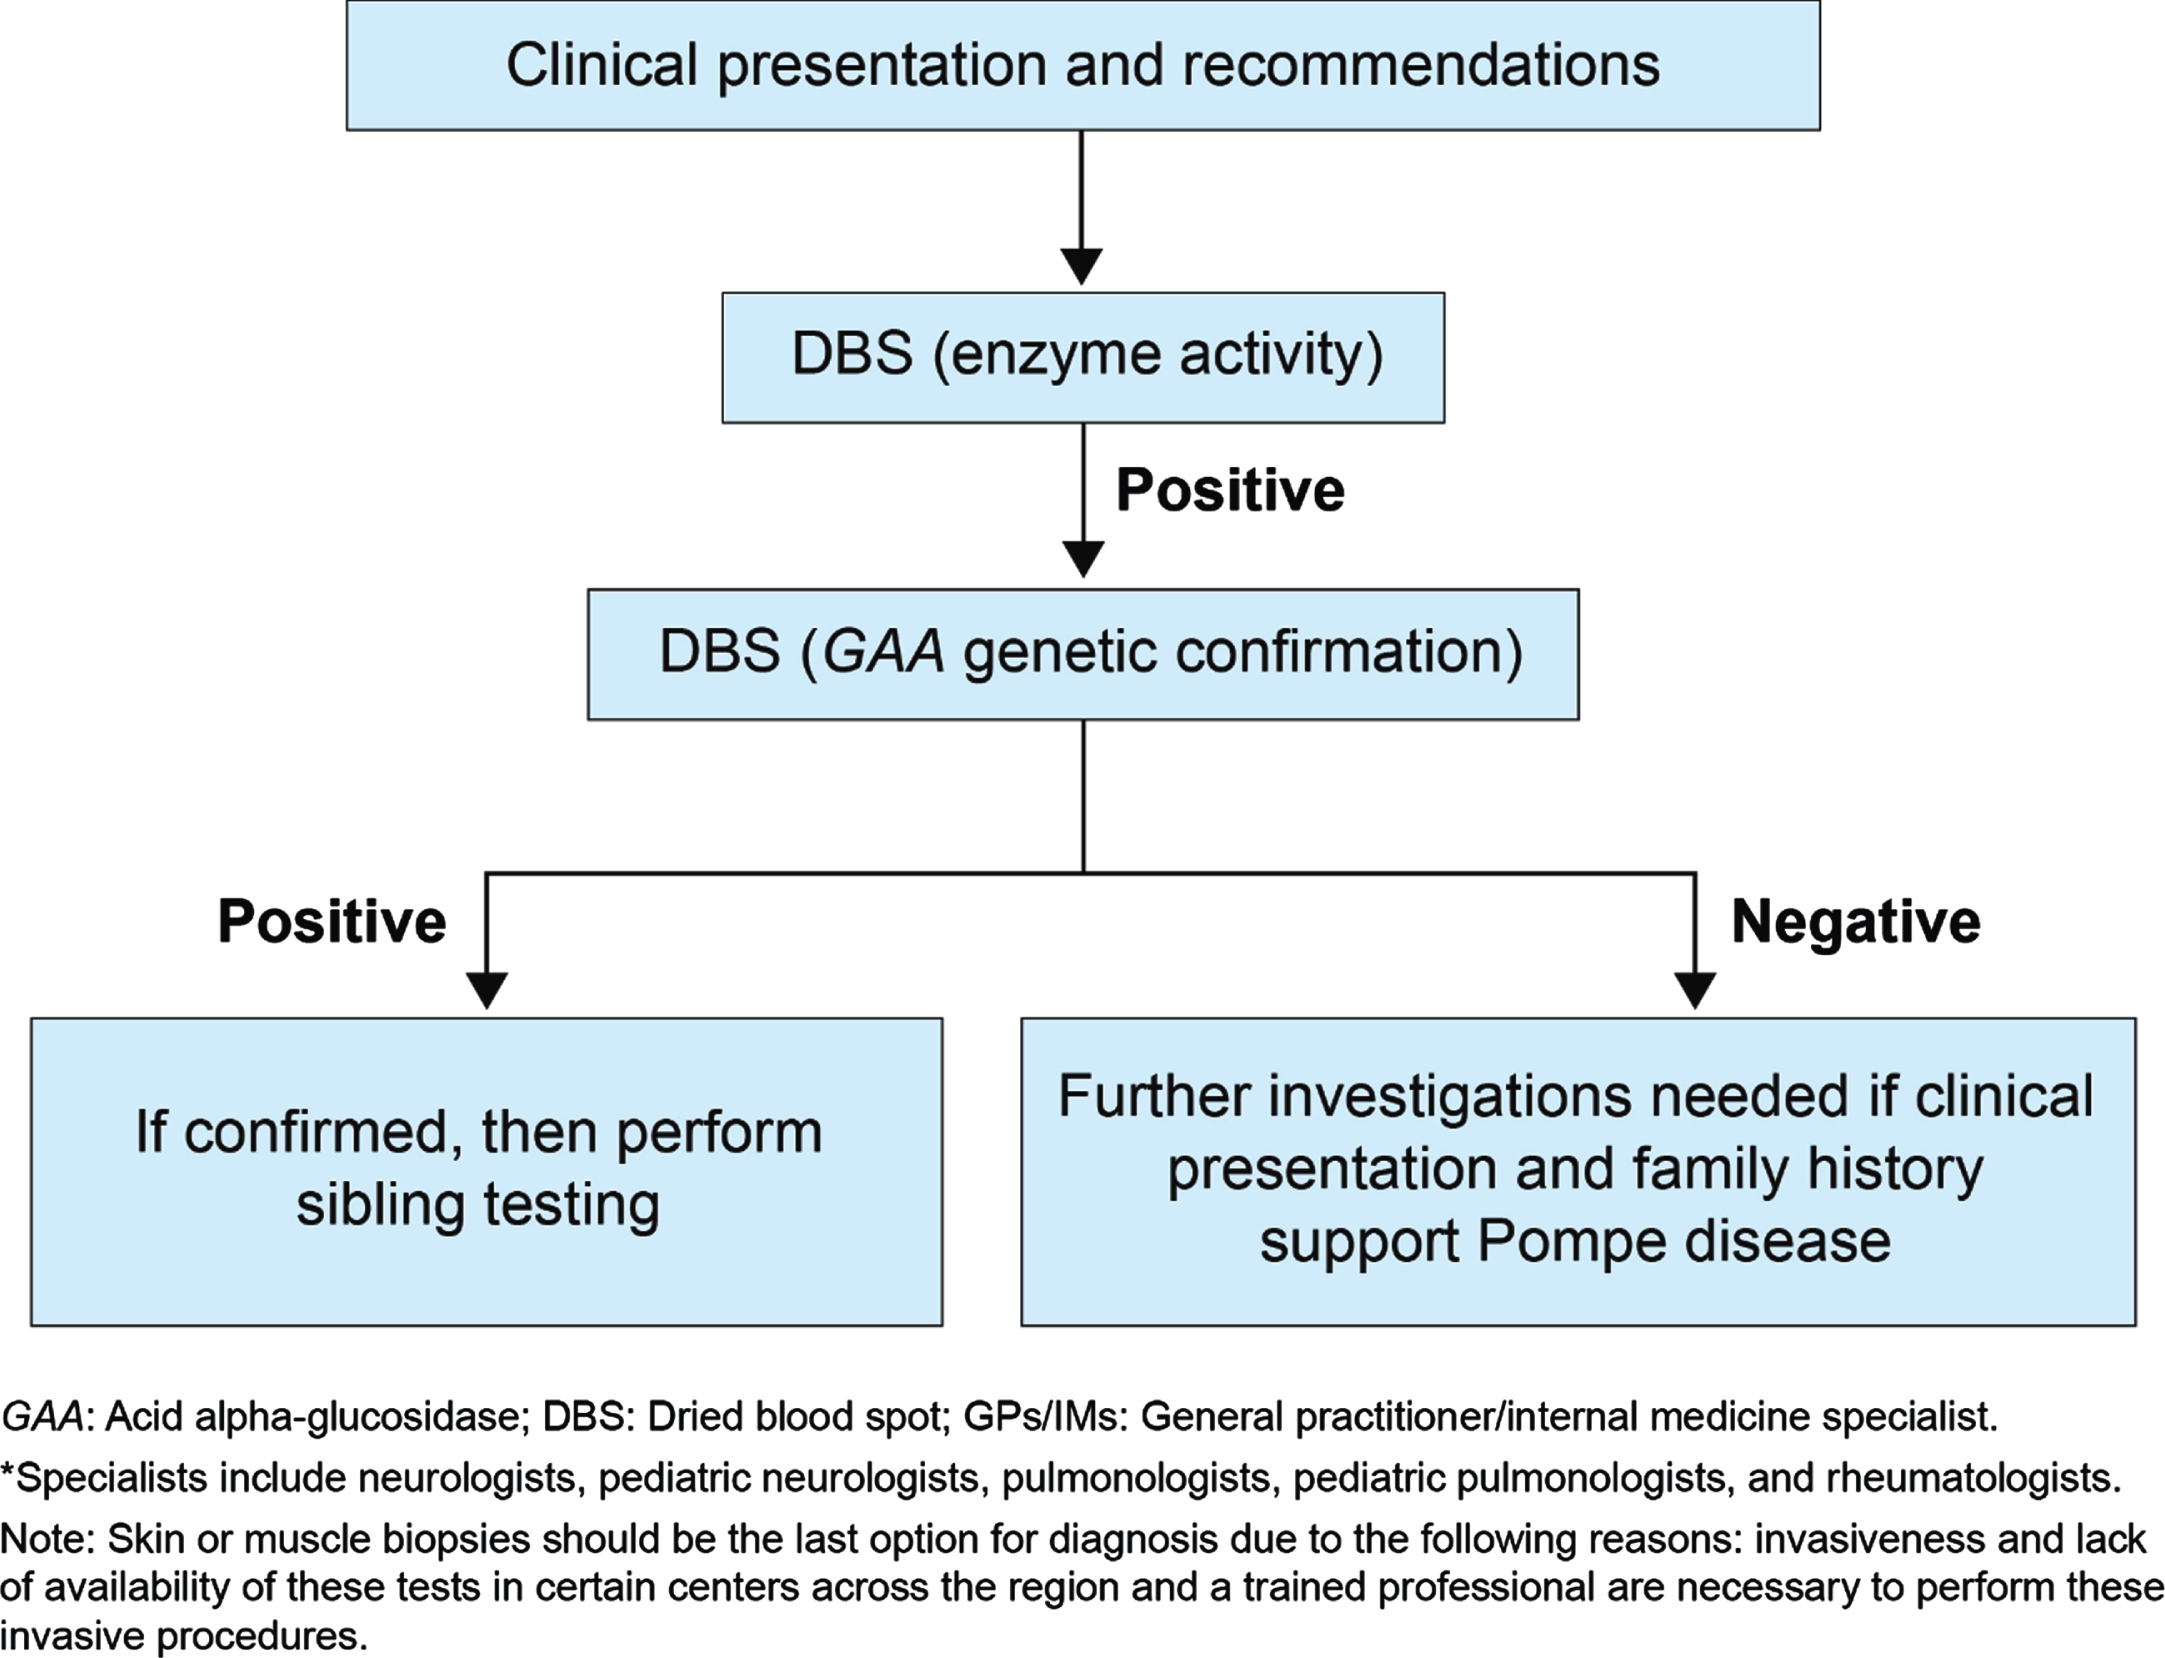 Proposed diagnostic algorithm for all specialists* except GPs/IMs/Peds /orthopedics.